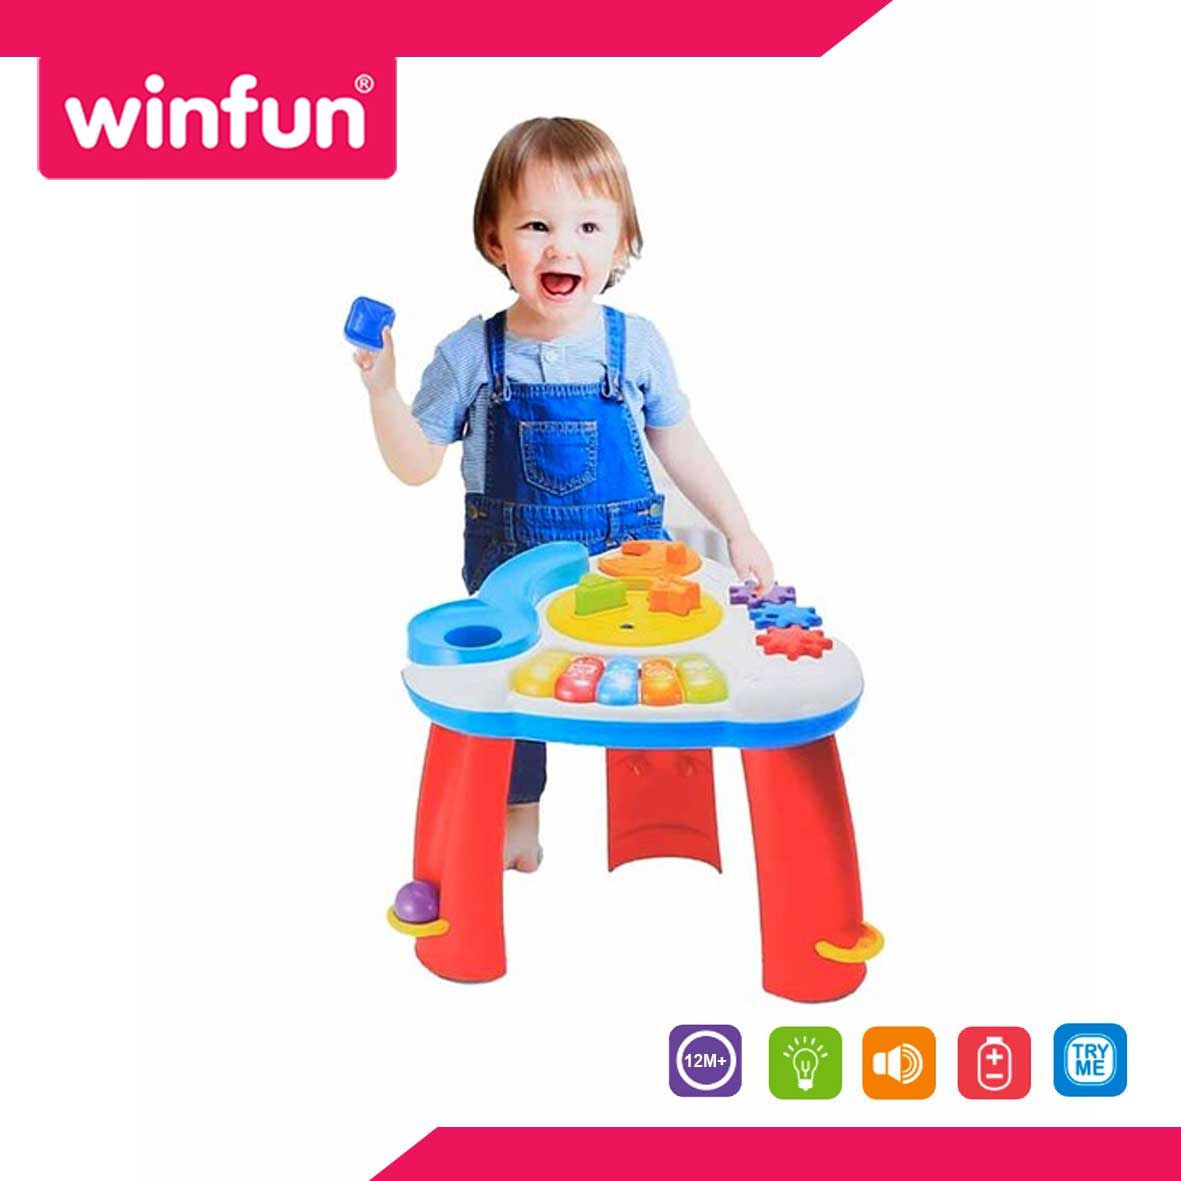 Winfun Ball 'n Shapes Musical Table - 3